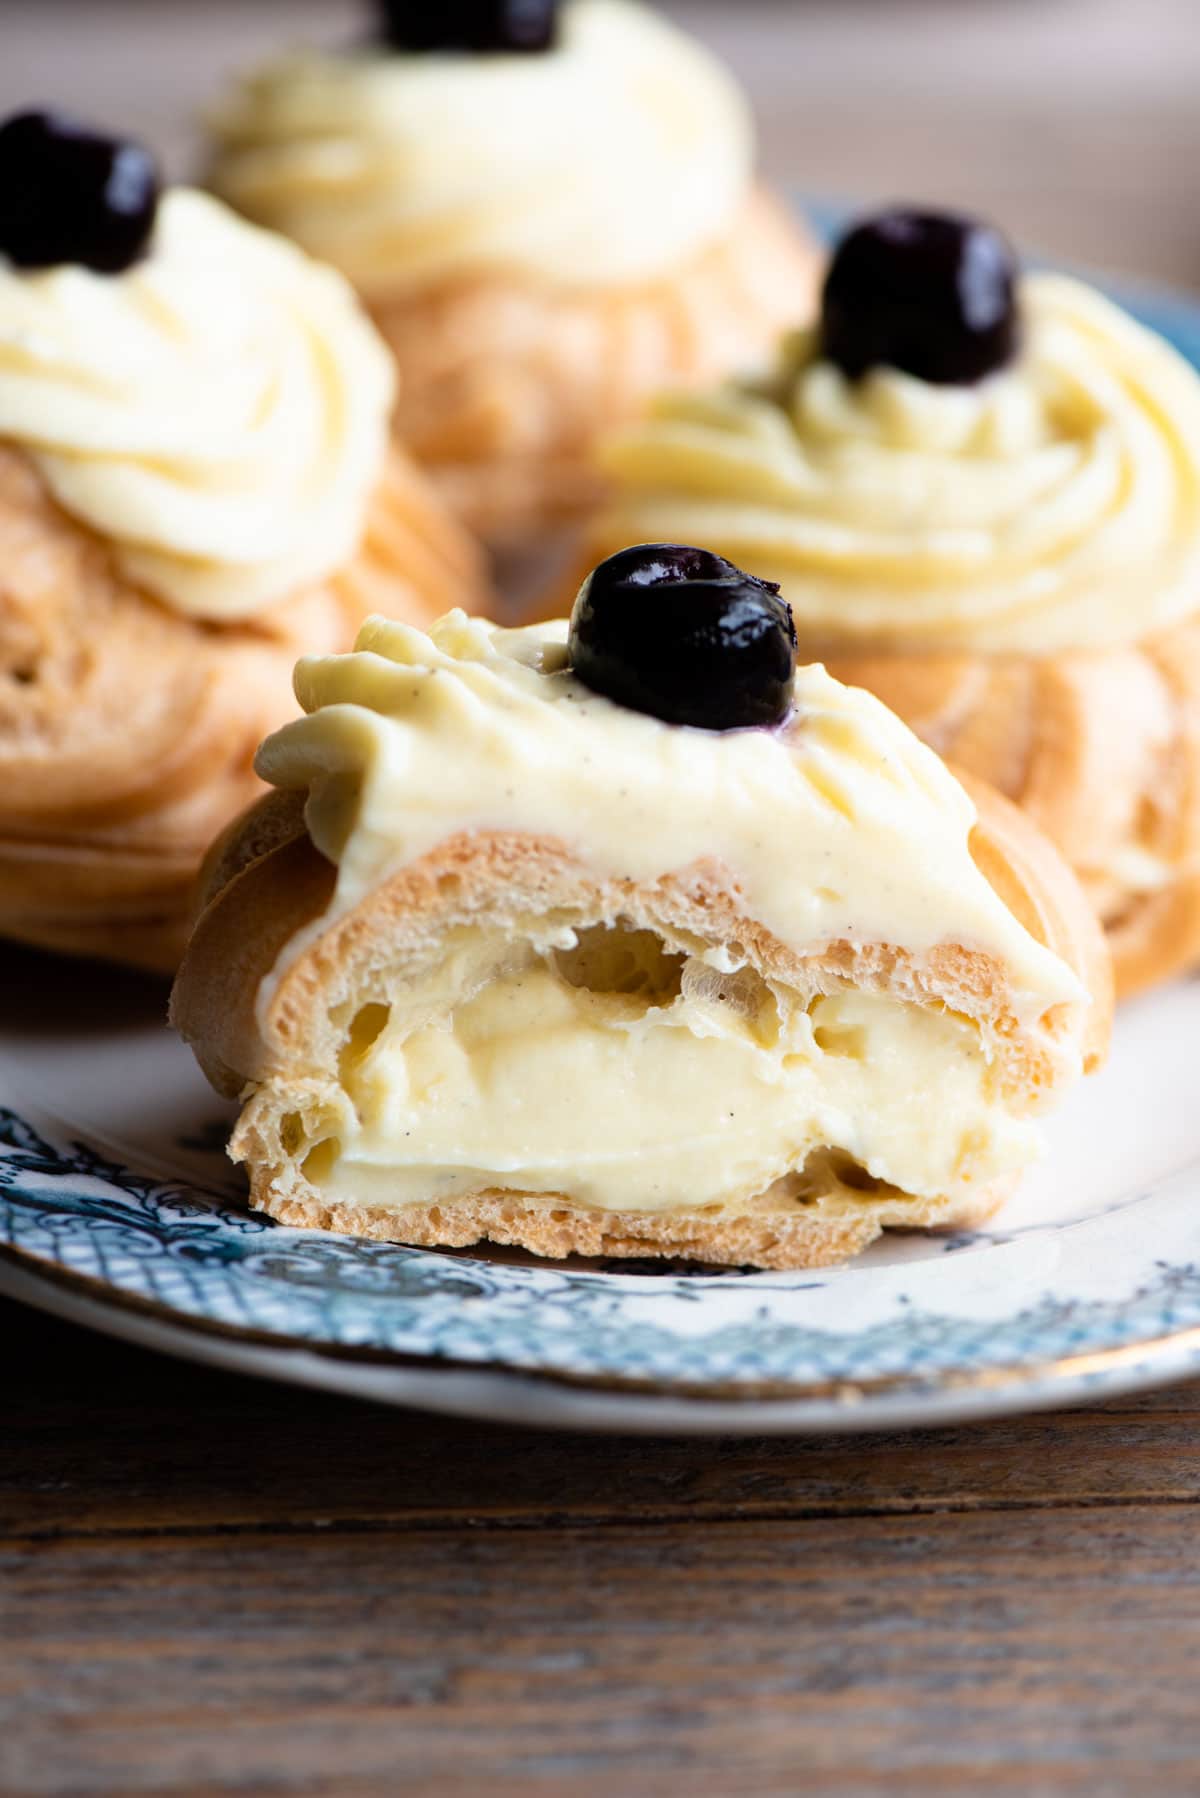 A close up of an Italian pastry cut in half and filled with pastry cream sitting on a blue plate.